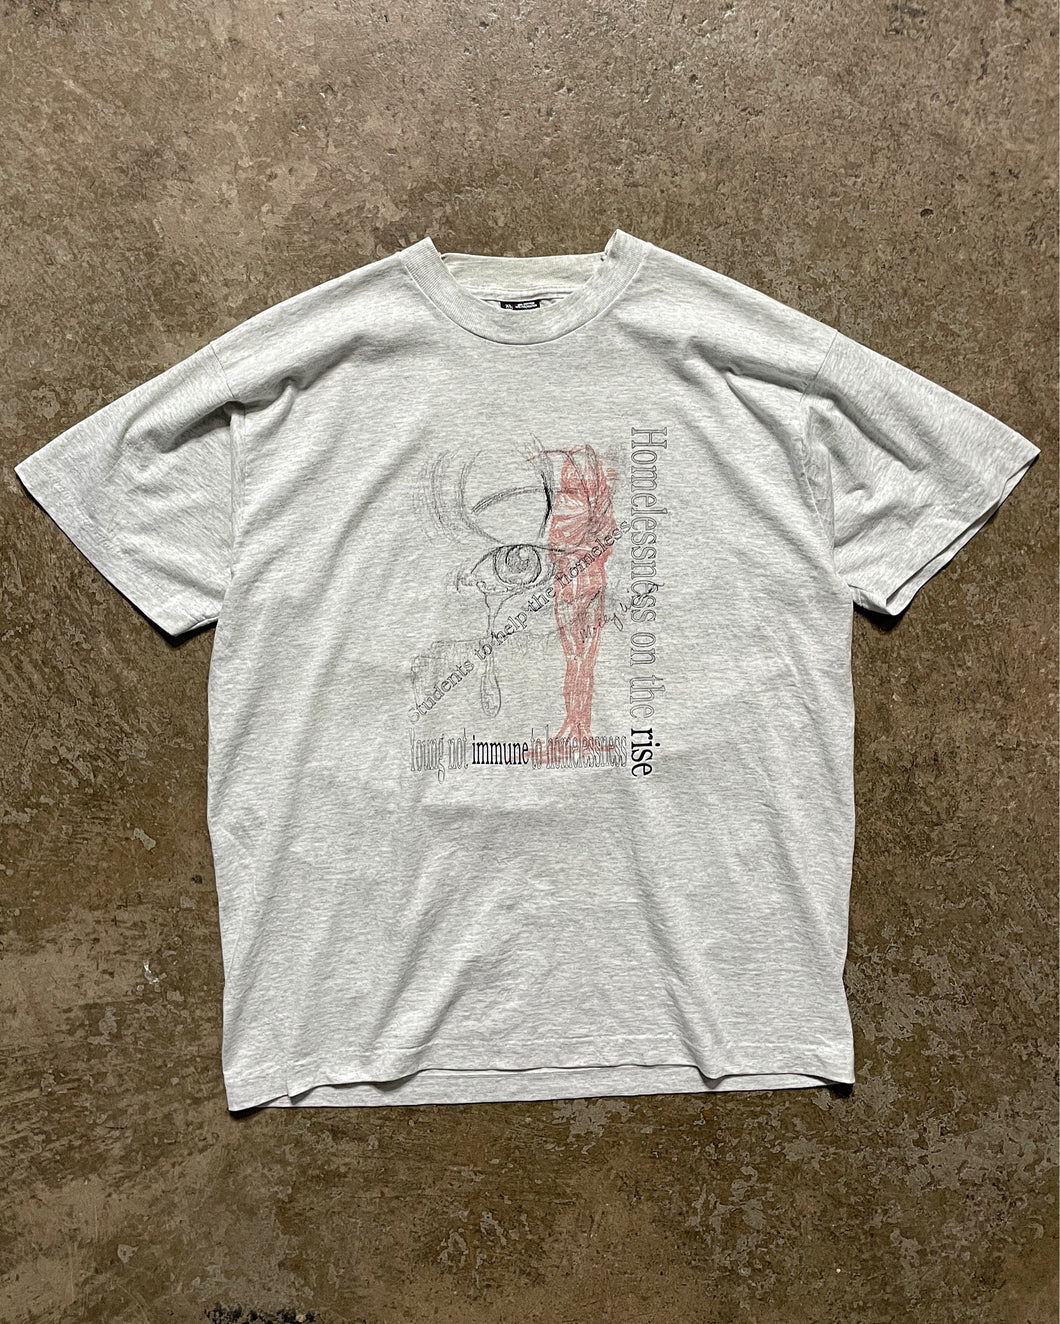 “Students Against Hunger” Tee - 1993